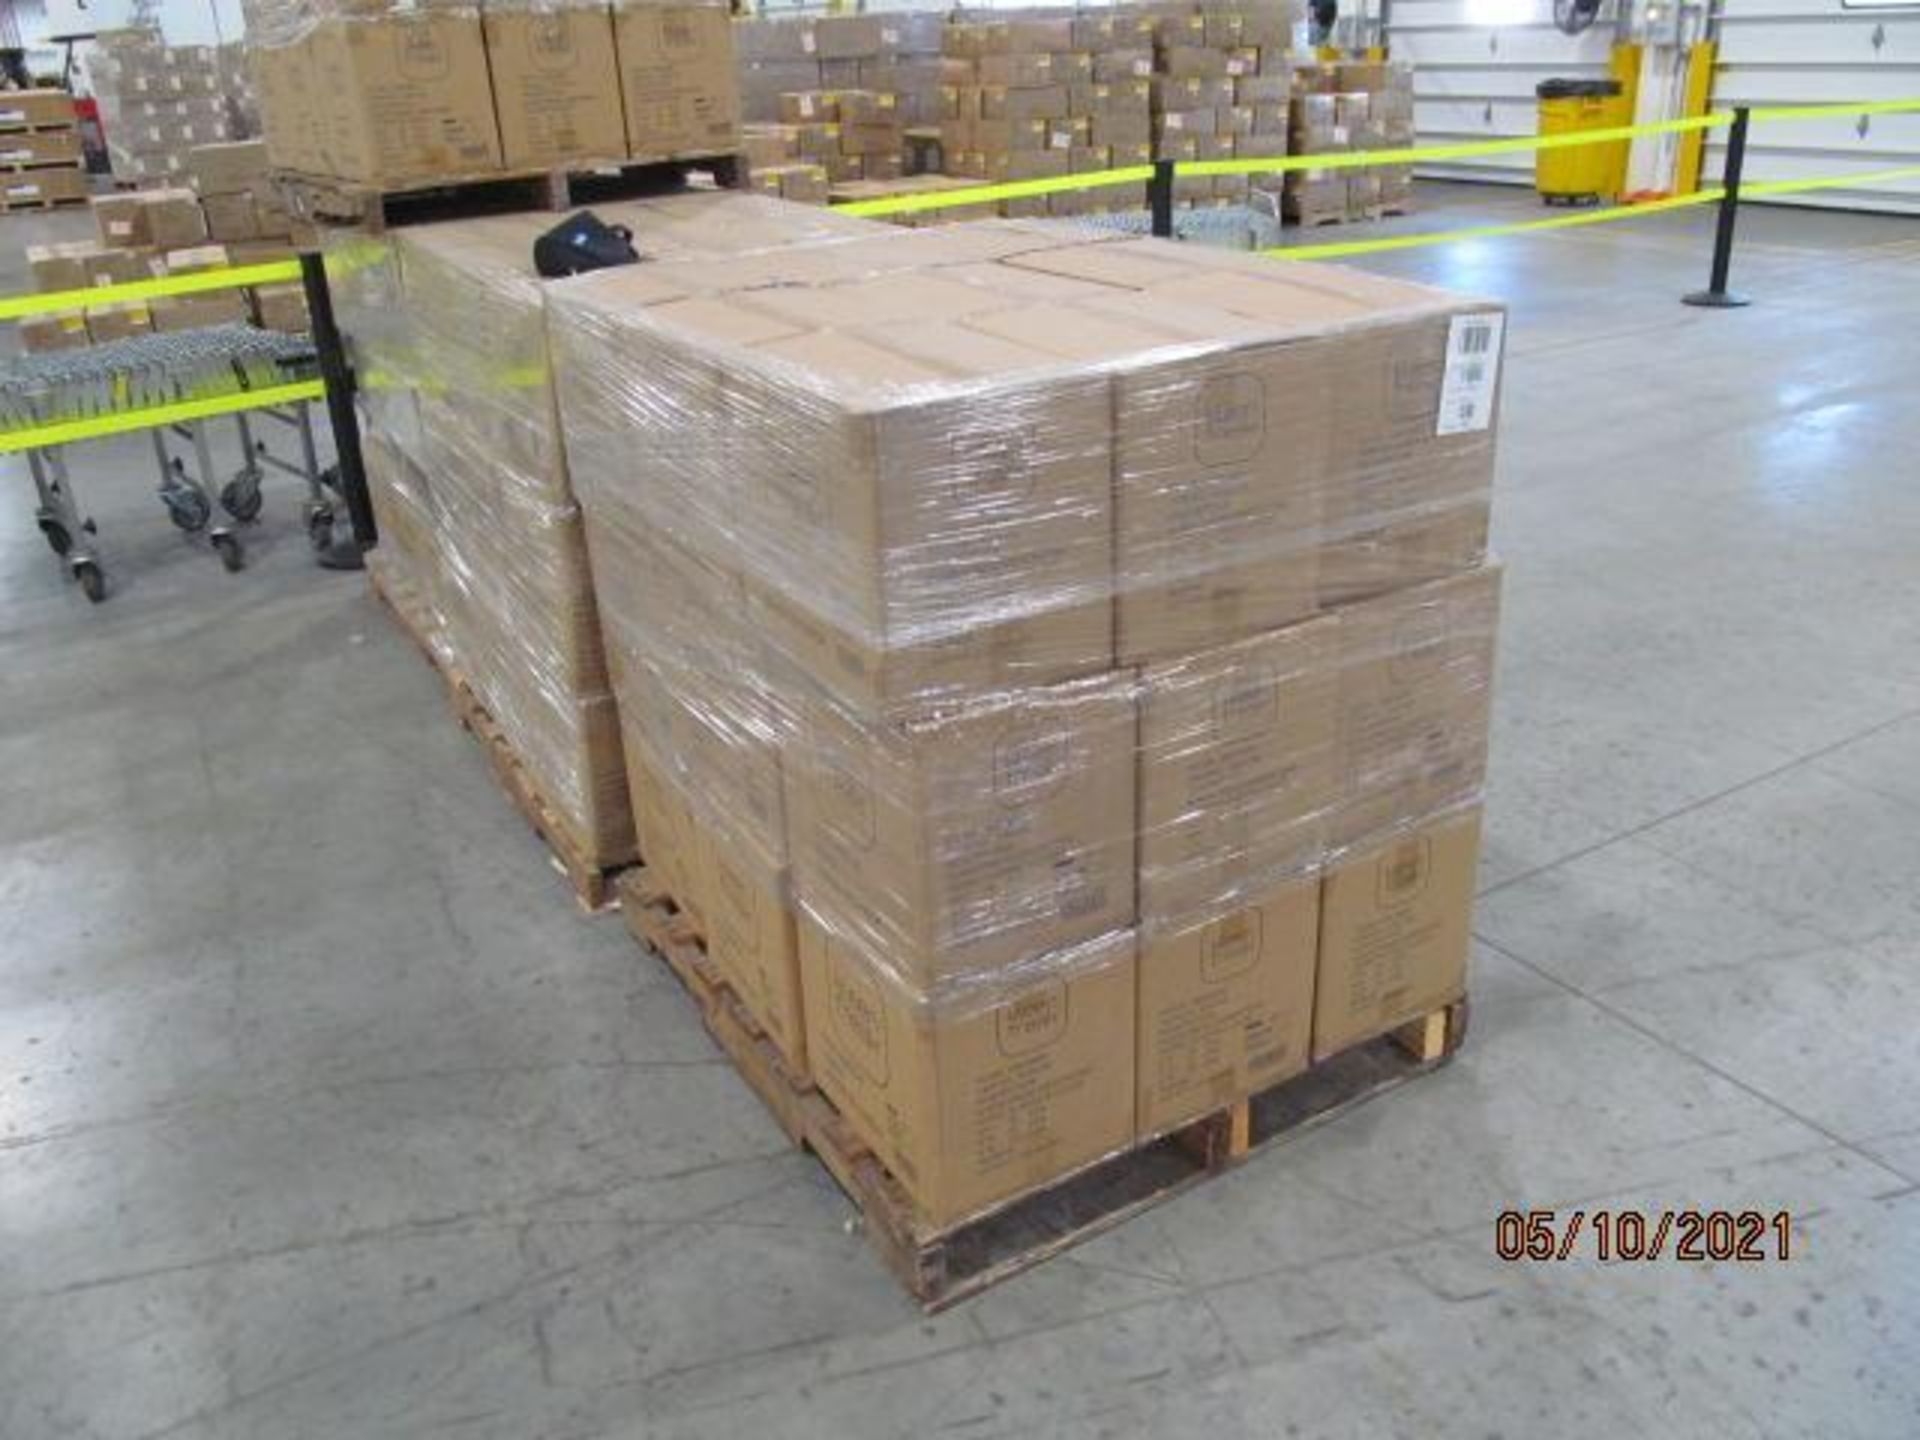 Lot of Waxman Kleen Freak Sanitizing Wipes consisting of 33,696 packages on 52 pallets. Each package - Image 7 of 11